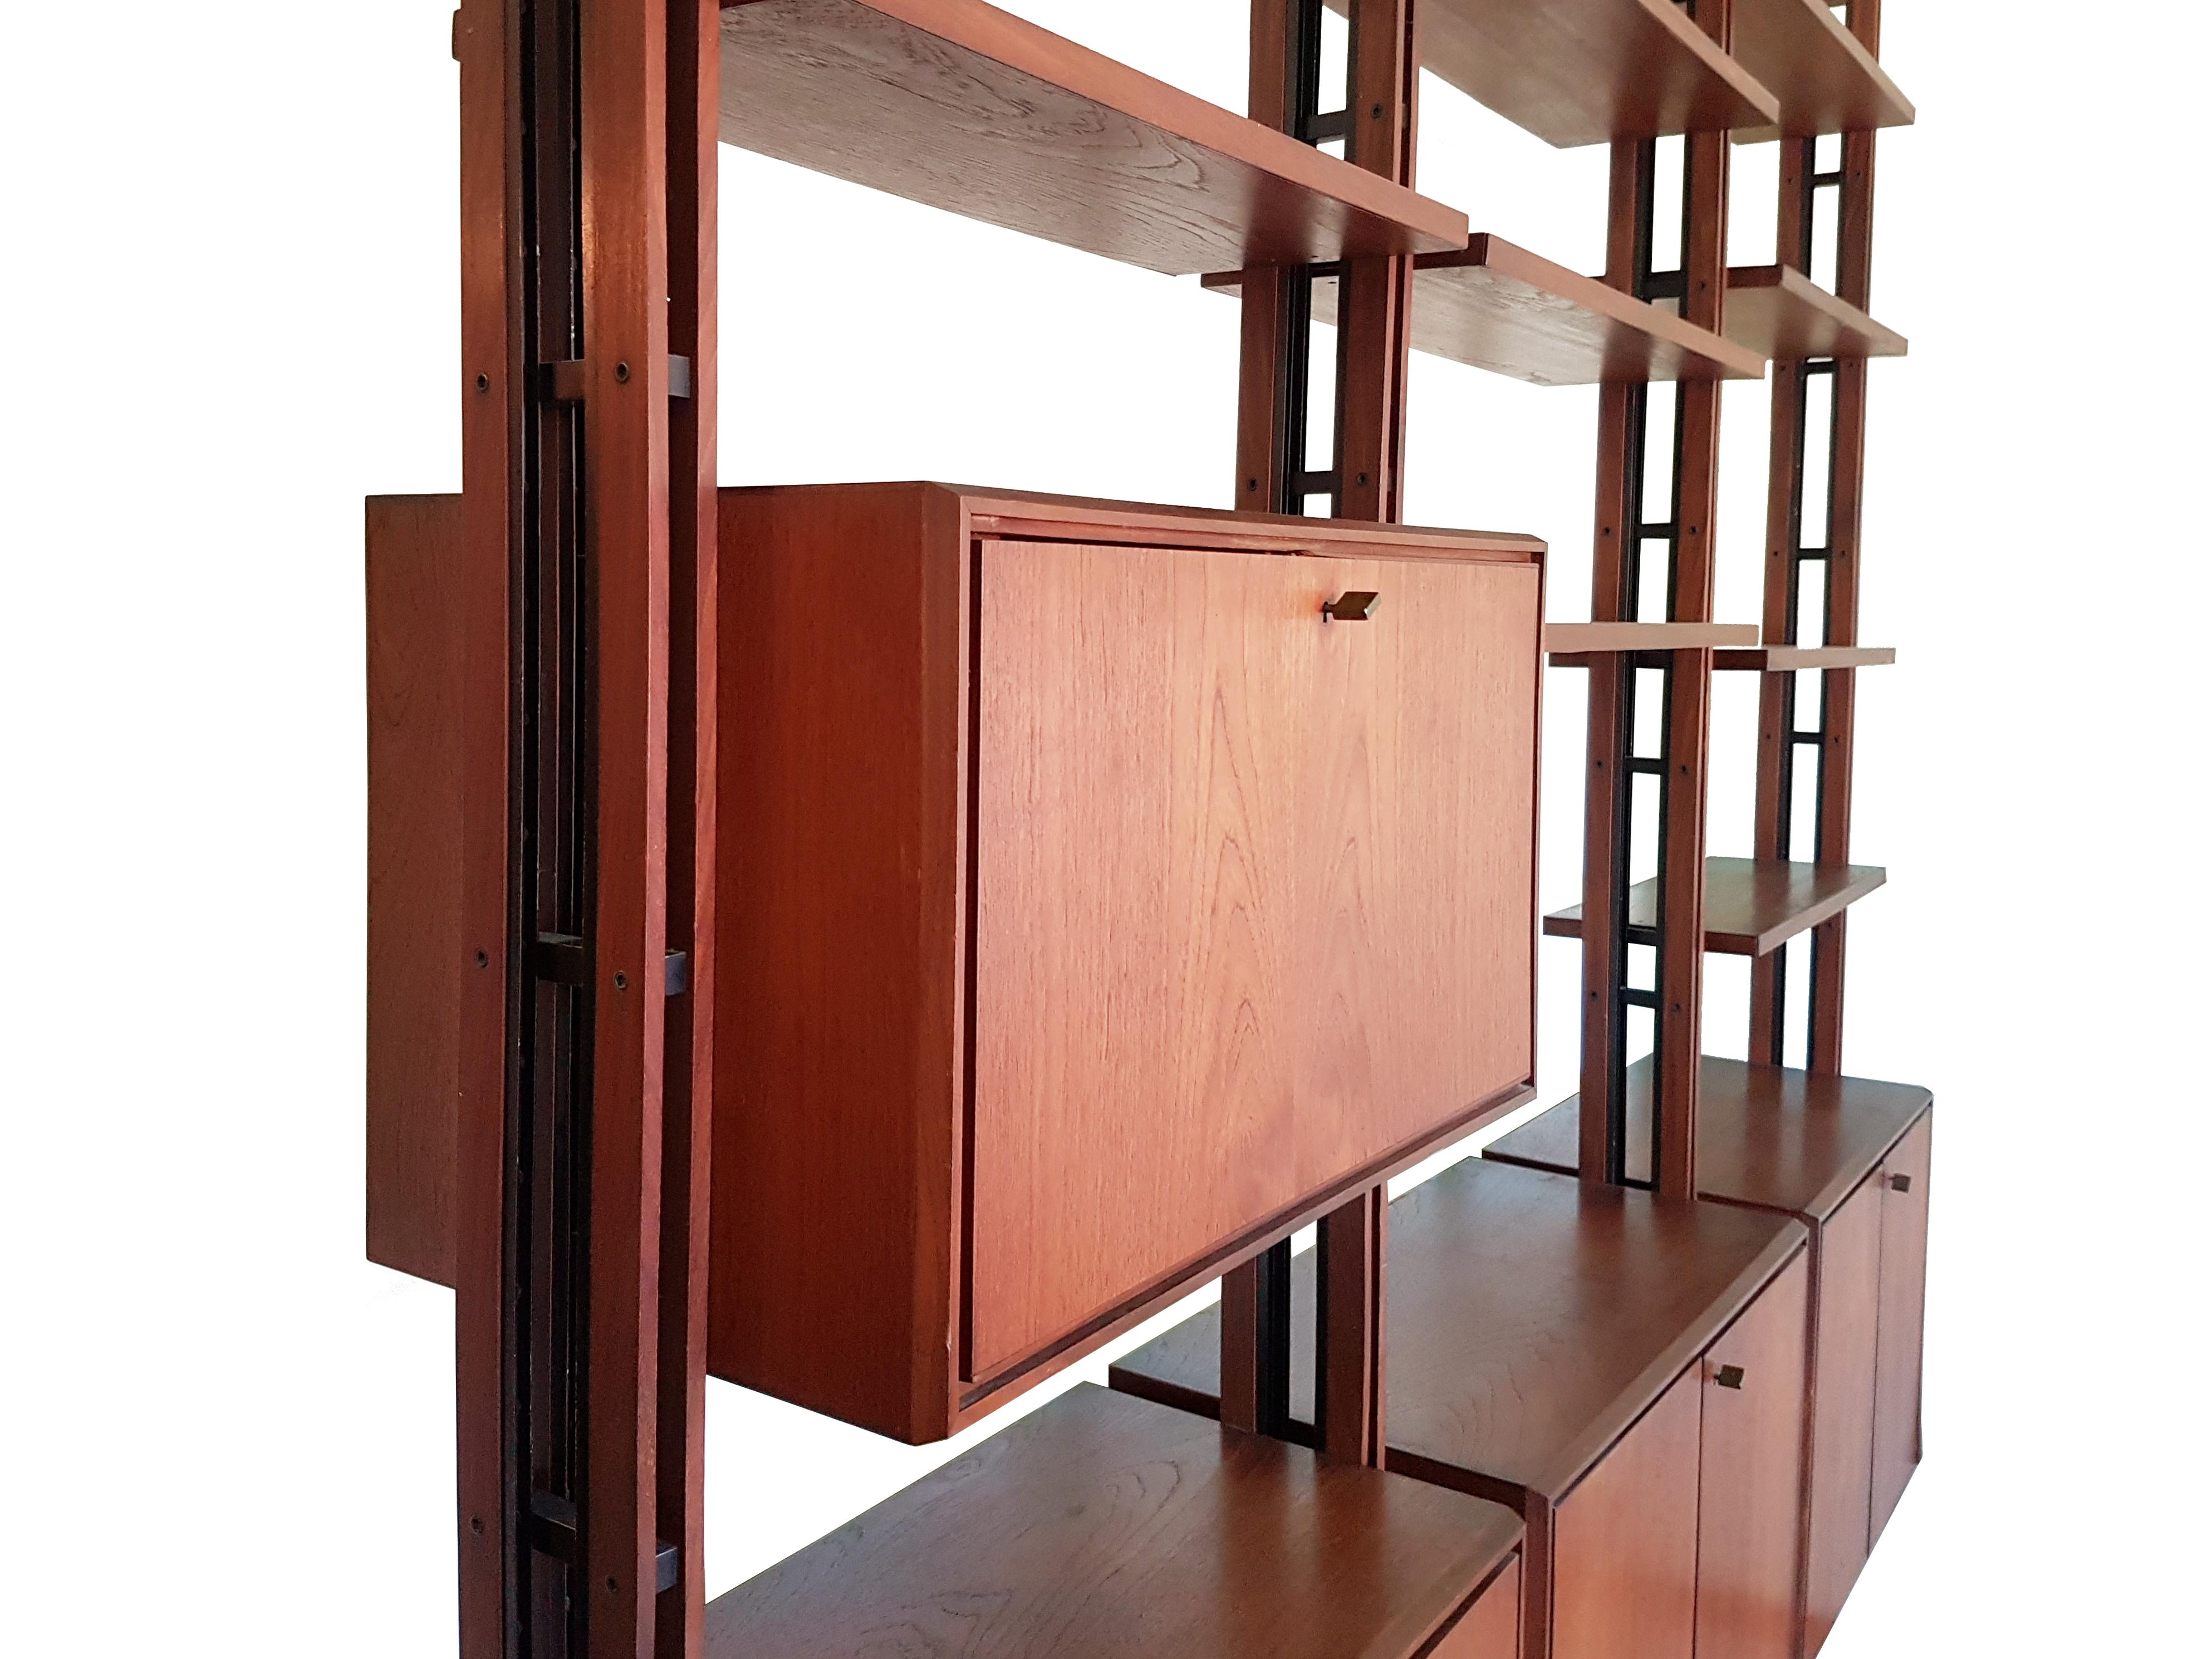 This bookshelves was produced in Italy in the 1950s. Thanks to its adjustable height (285-310 cm) it can be placed against a wall or anywhere in a room, used as a space divider.
It is composed by 4 vertical upright, 4 cabinets (3 with doors and